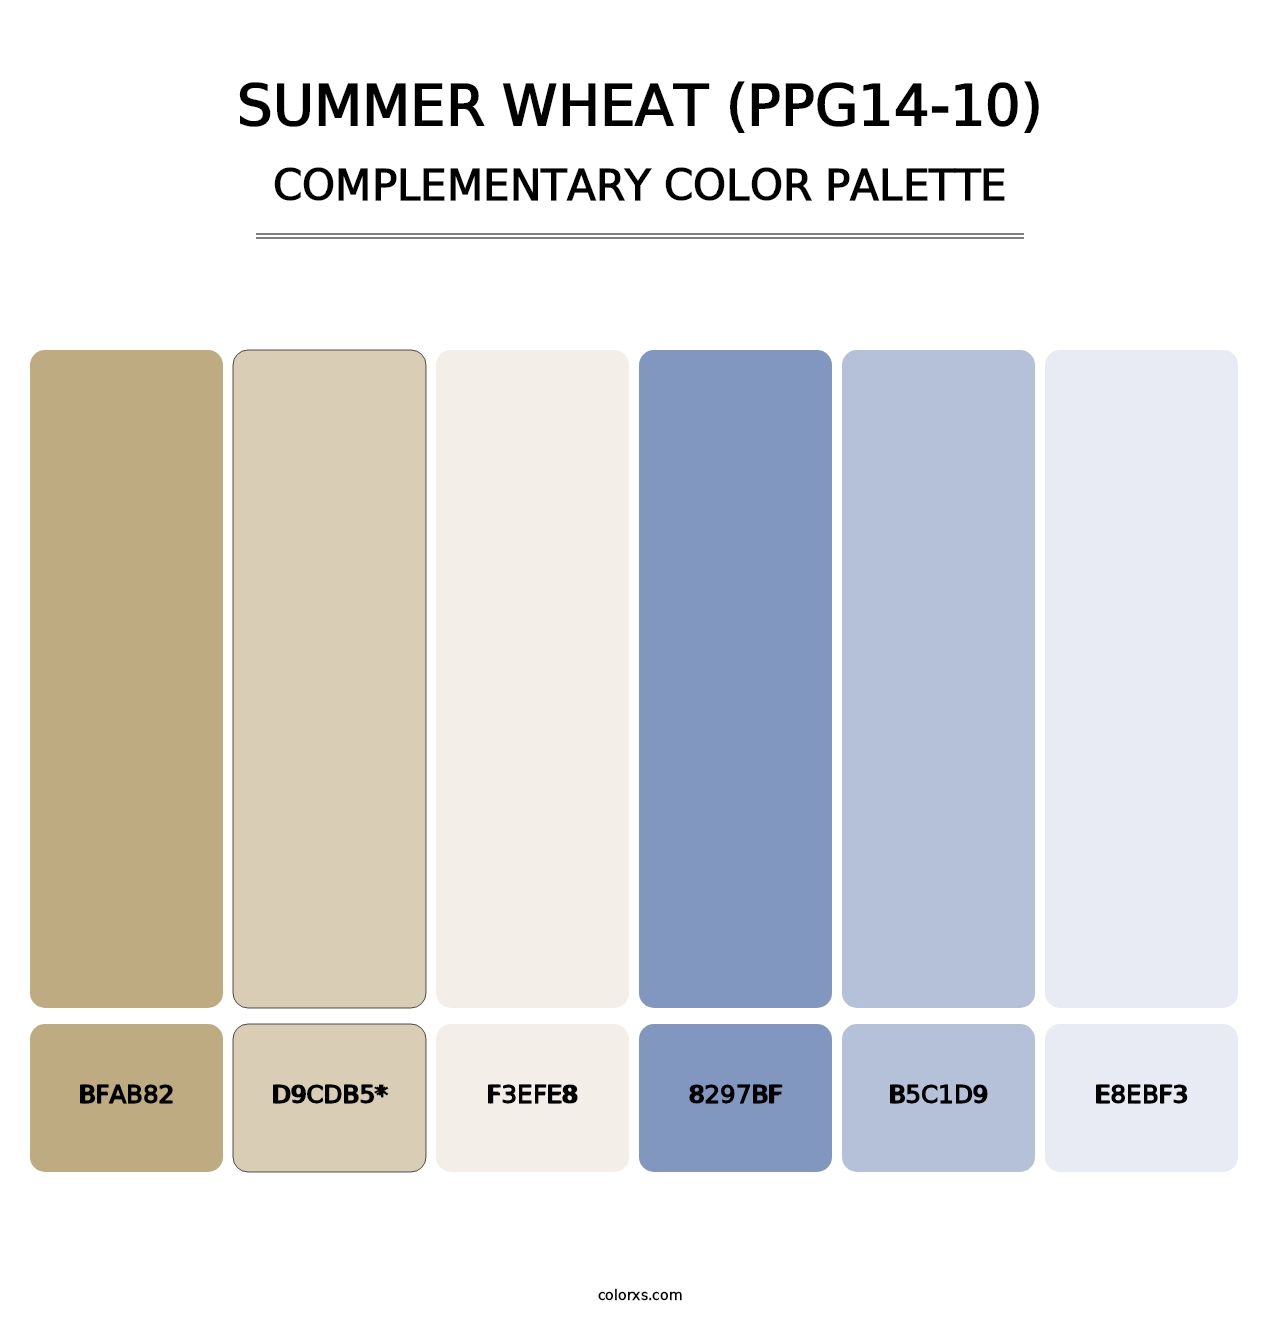 Summer Wheat (PPG14-10) - Complementary Color Palette